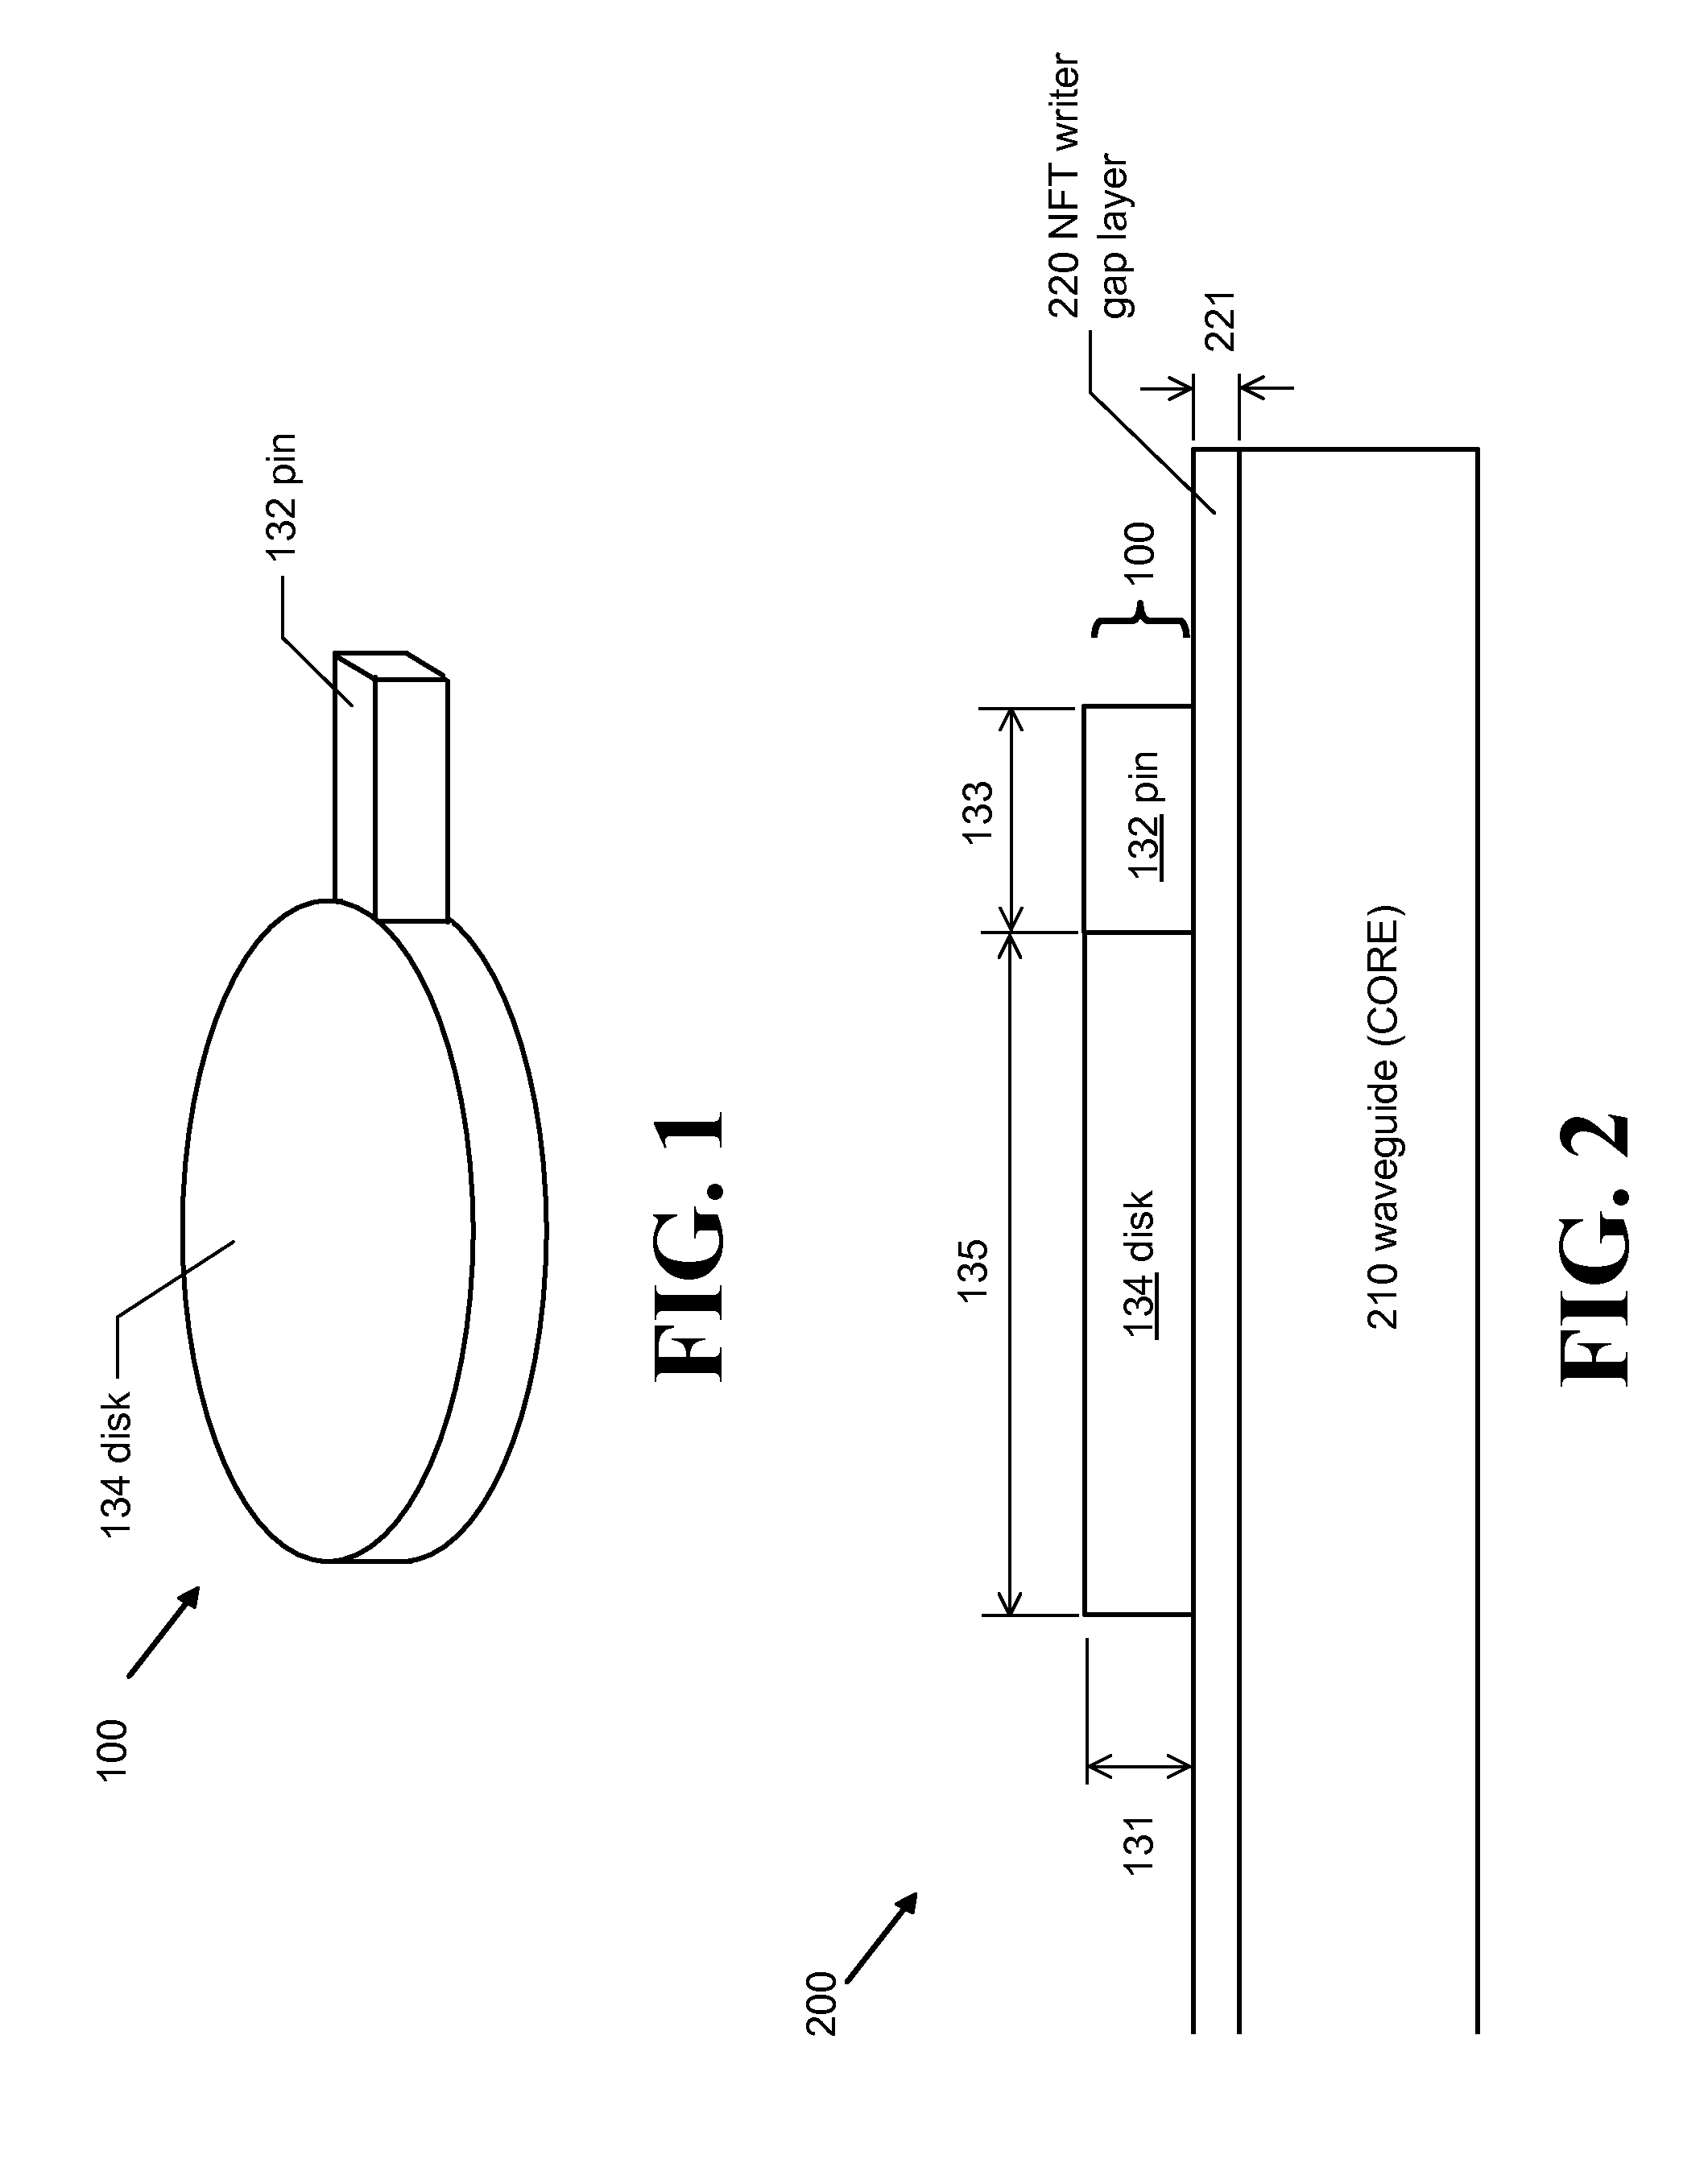 Double hard-mask mill back method of fabricating a near field transducer for energy assisted magnetic recording